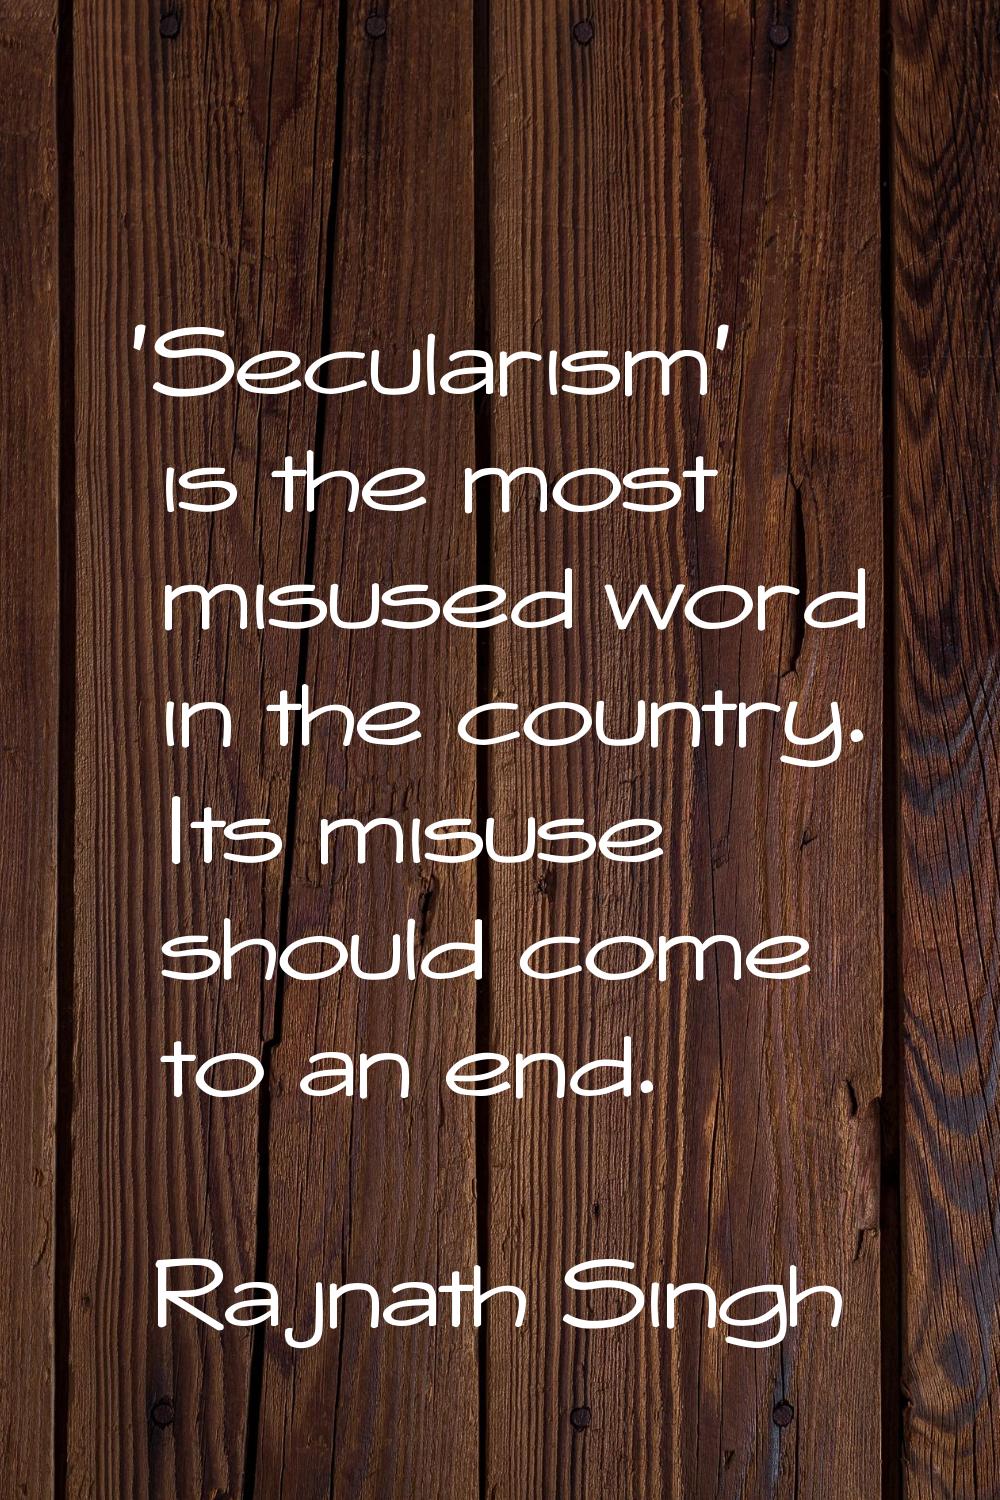 'Secularism' is the most misused word in the country. Its misuse should come to an end.